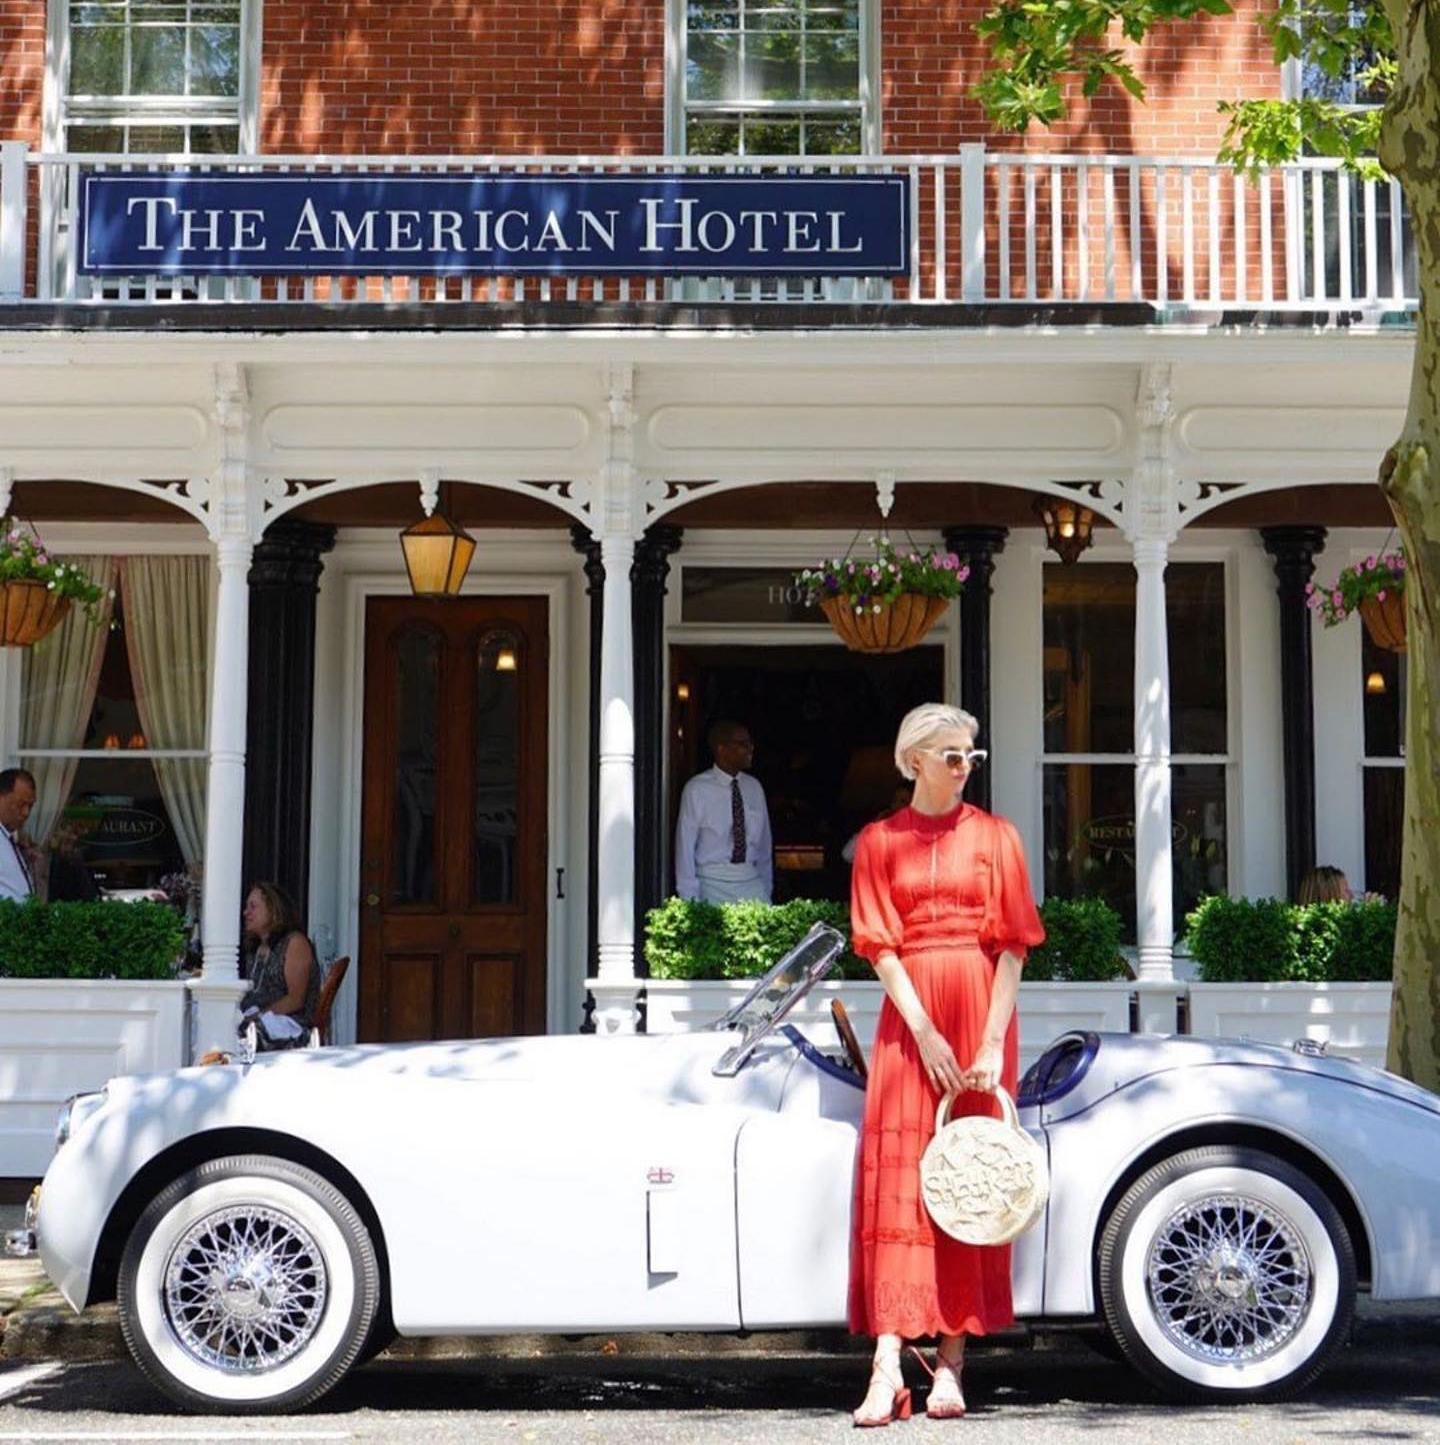 The American Hotel in Sag Harbor, New York